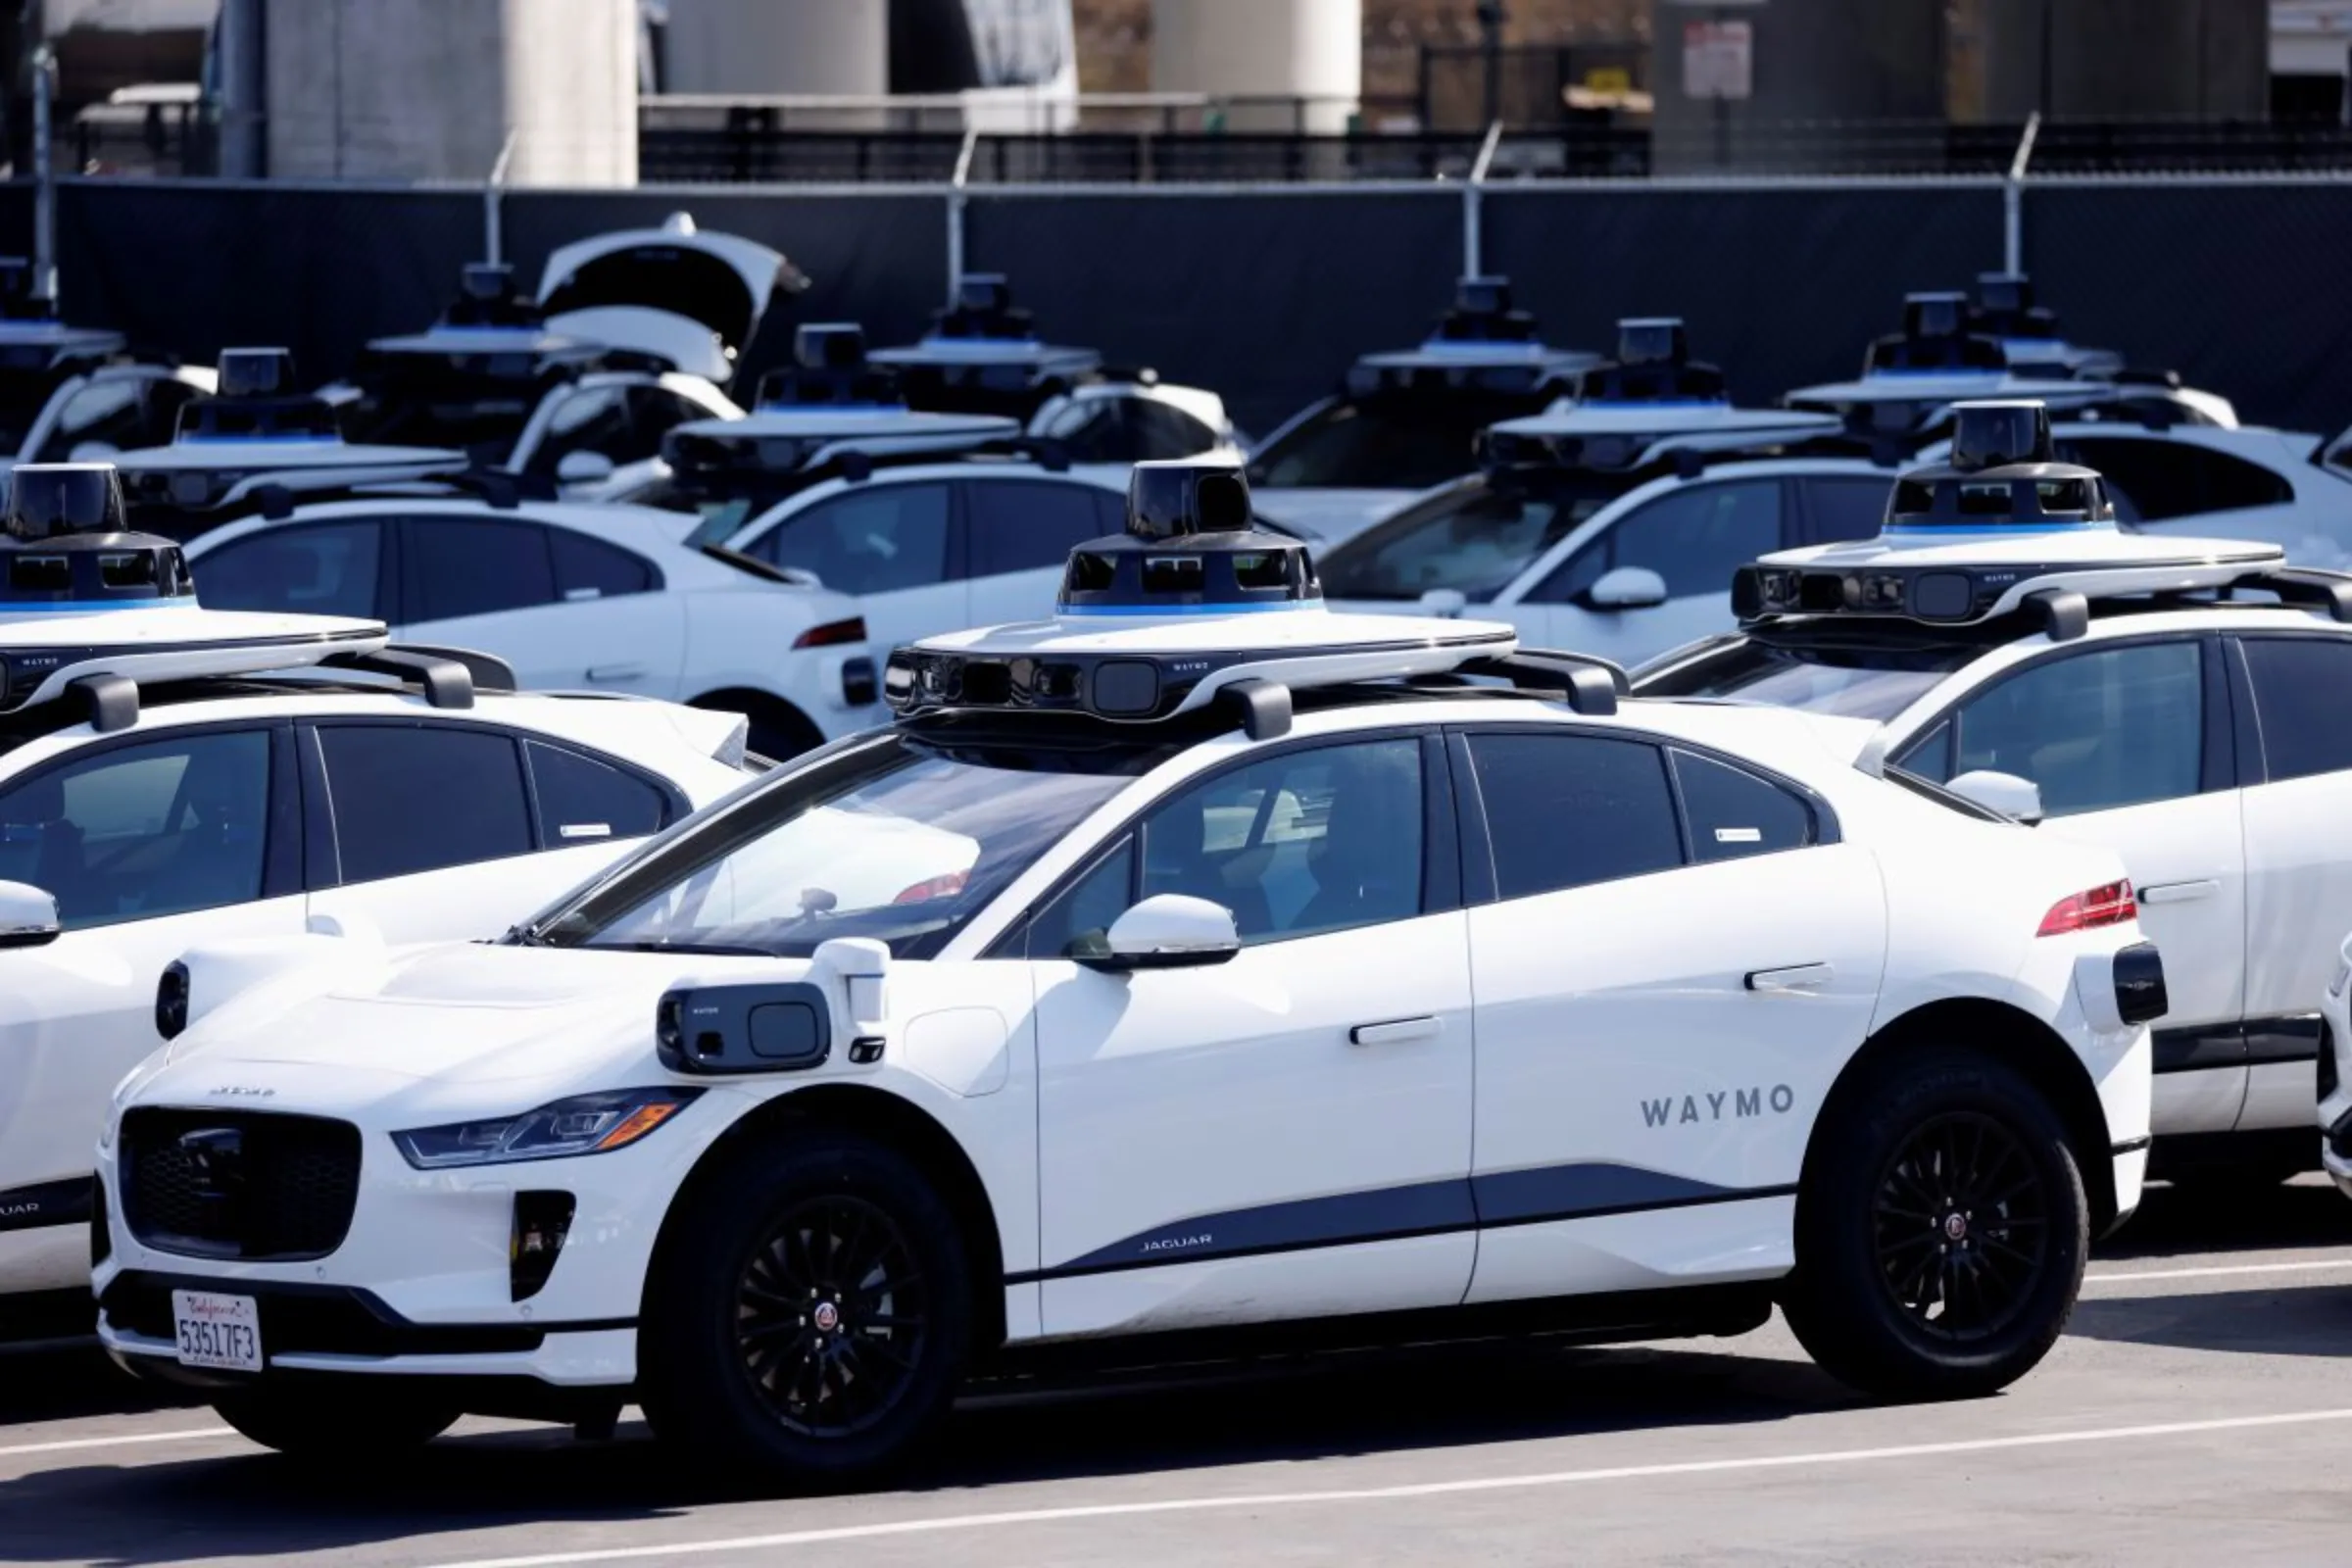 A view shows some of a small fleet of Jaguar I-Pace electric vehicles at Waymo's operations center in the Bayview district of San Francisco, California, U.S. October 19, 2021. Picture taken October 19, 2021. REUTERS/Peter DaSilva